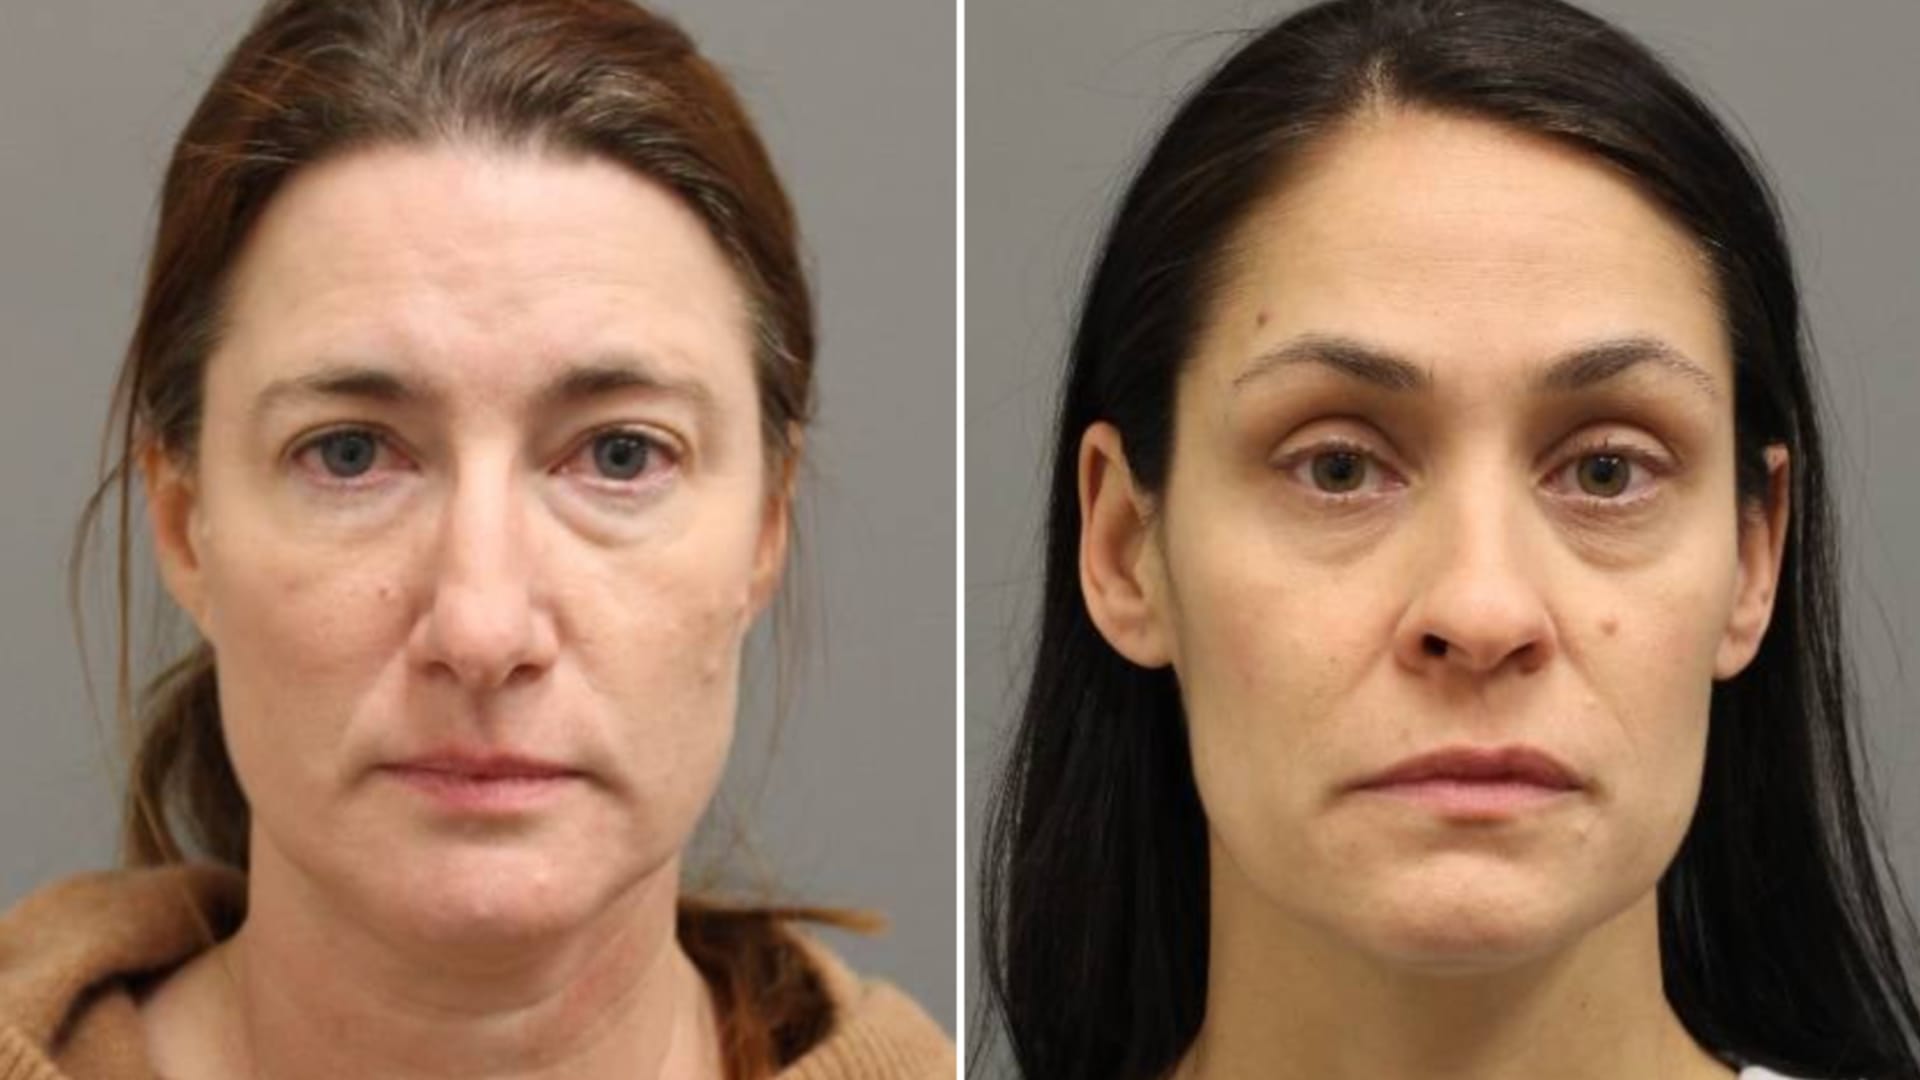 Julie DeVuono (L) and Marissa Urraro's booking photos from the Suffolk County Police Dept. on Jan. 29th, 2022